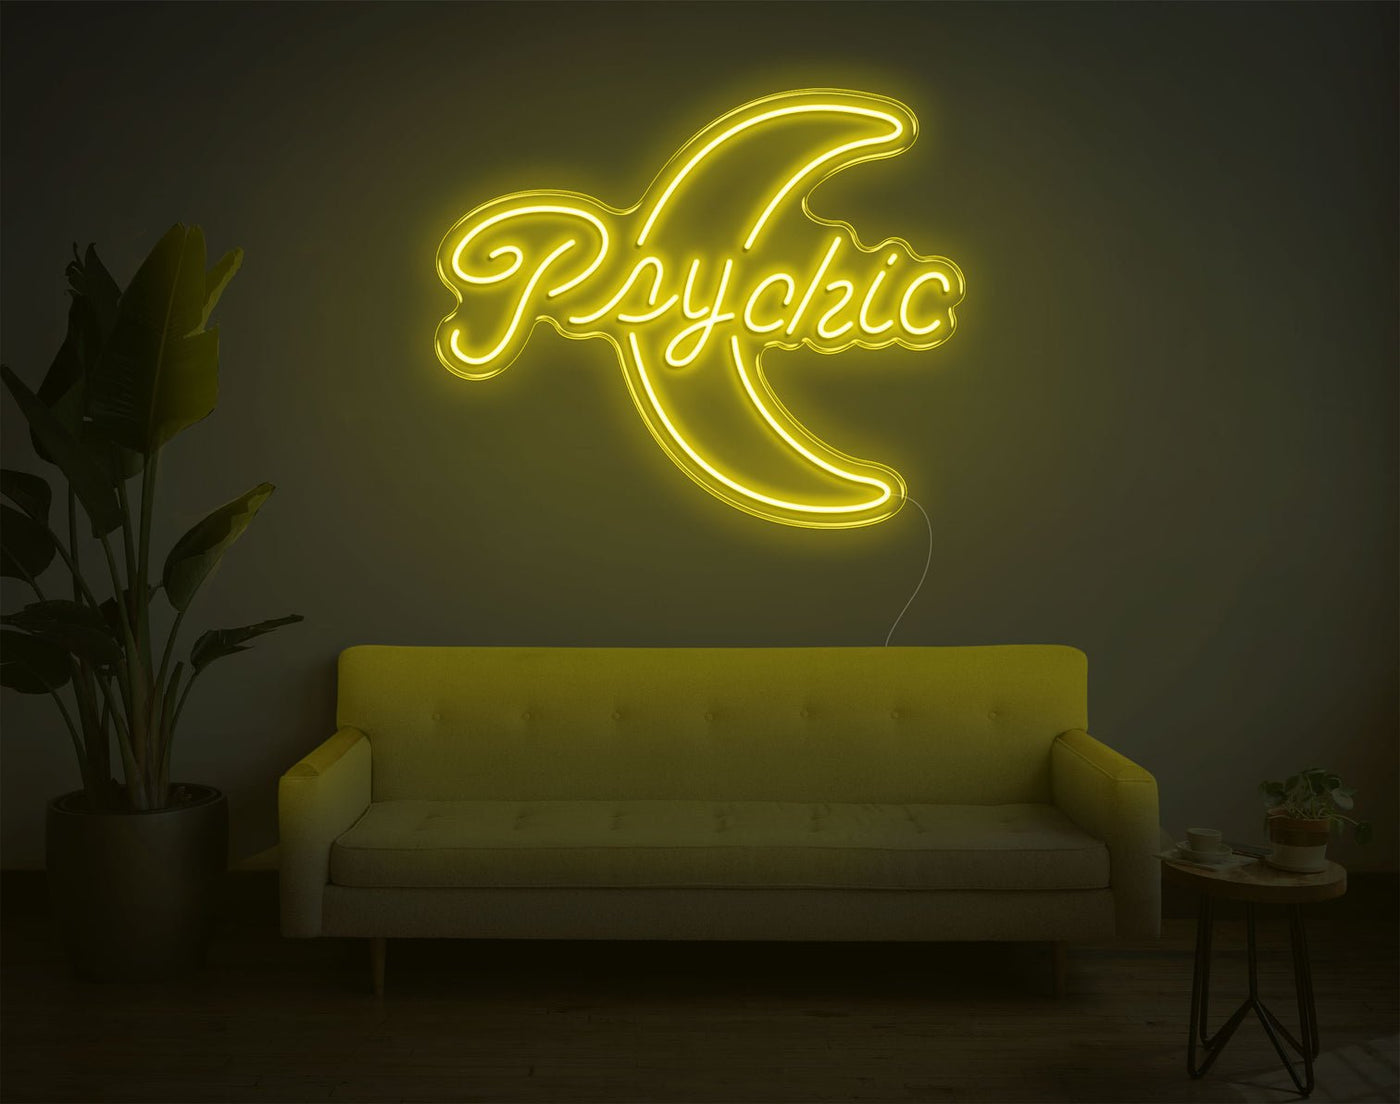 Psychic Moon LED Neon Sign - 23inch x 28inchYellow